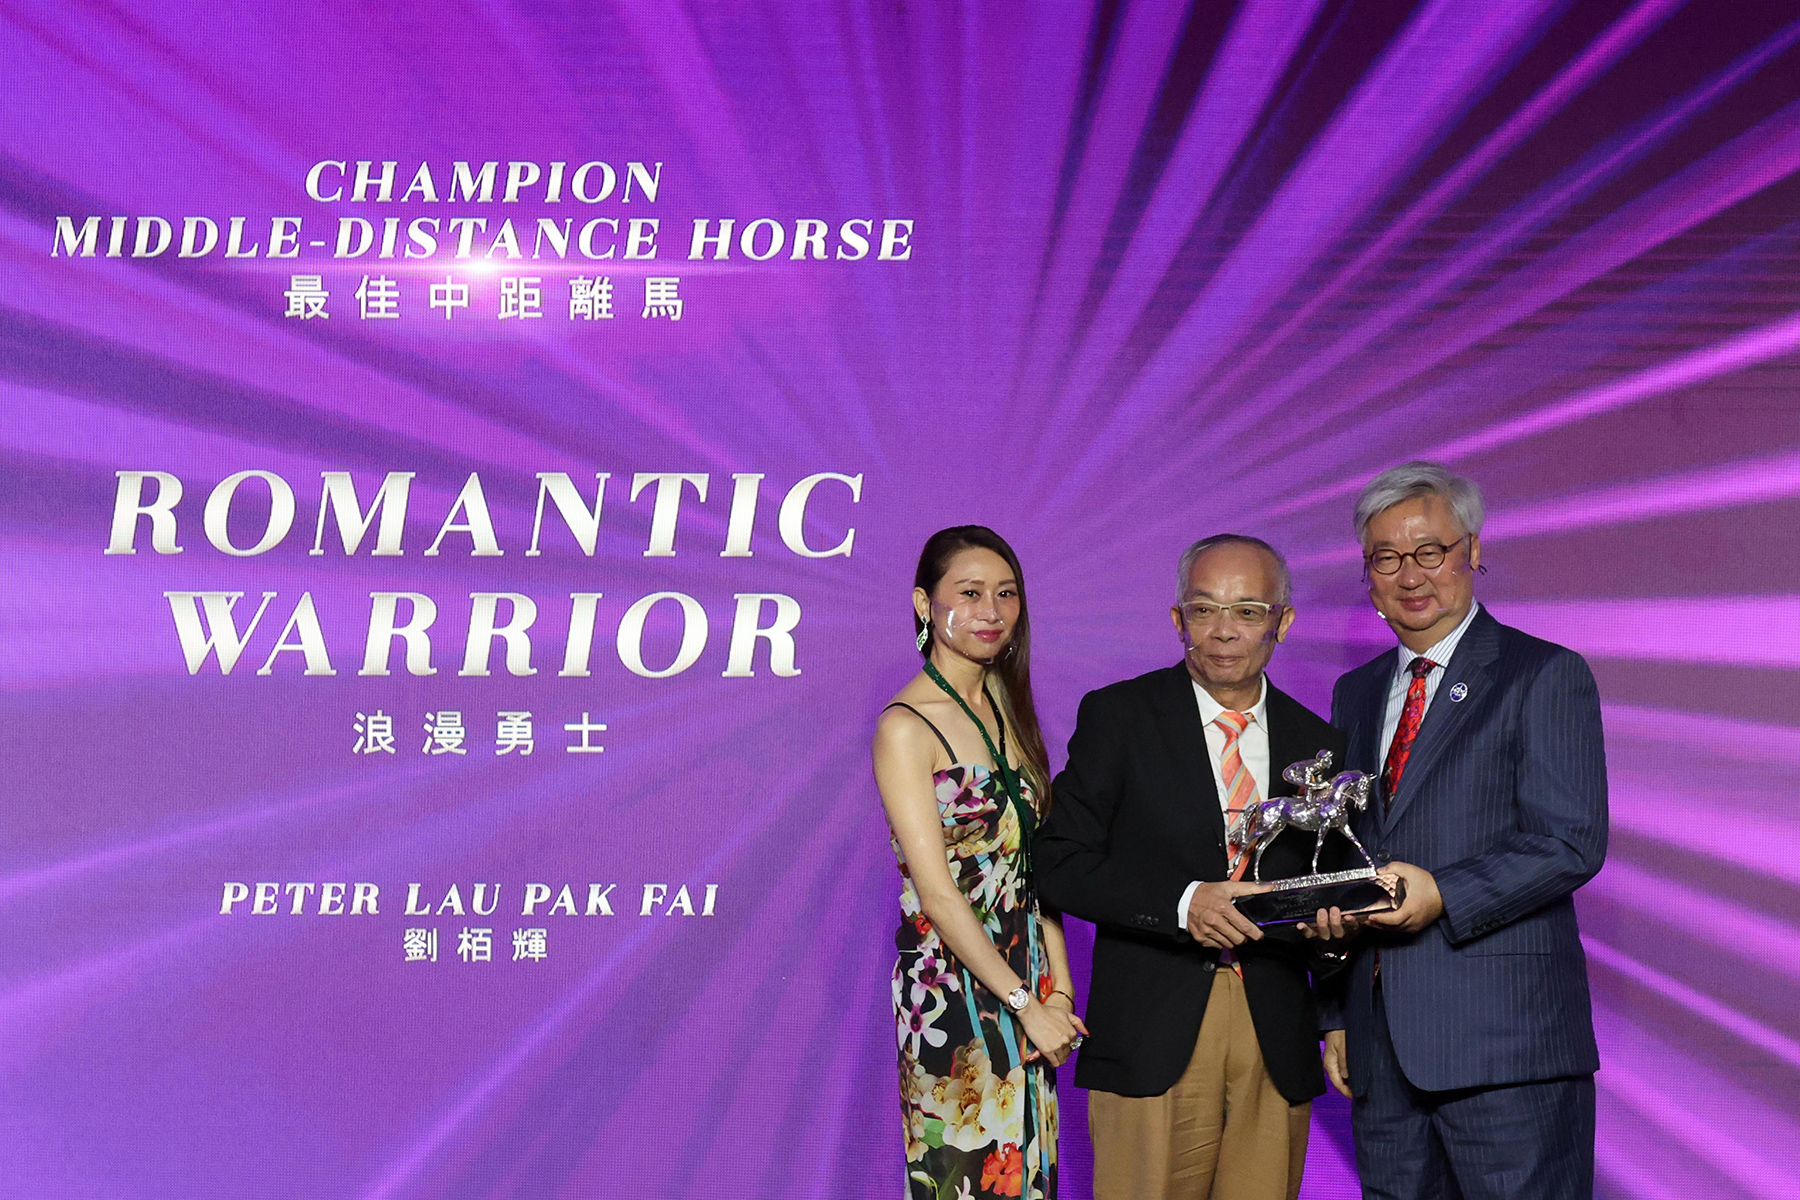 Dr Silas Yang, Steward of The Hong Kong Jockey Club, presents the Champion Middle-Distance trophy to Mr Peter Lau Pak Fai, owner of Romantic Warrior.